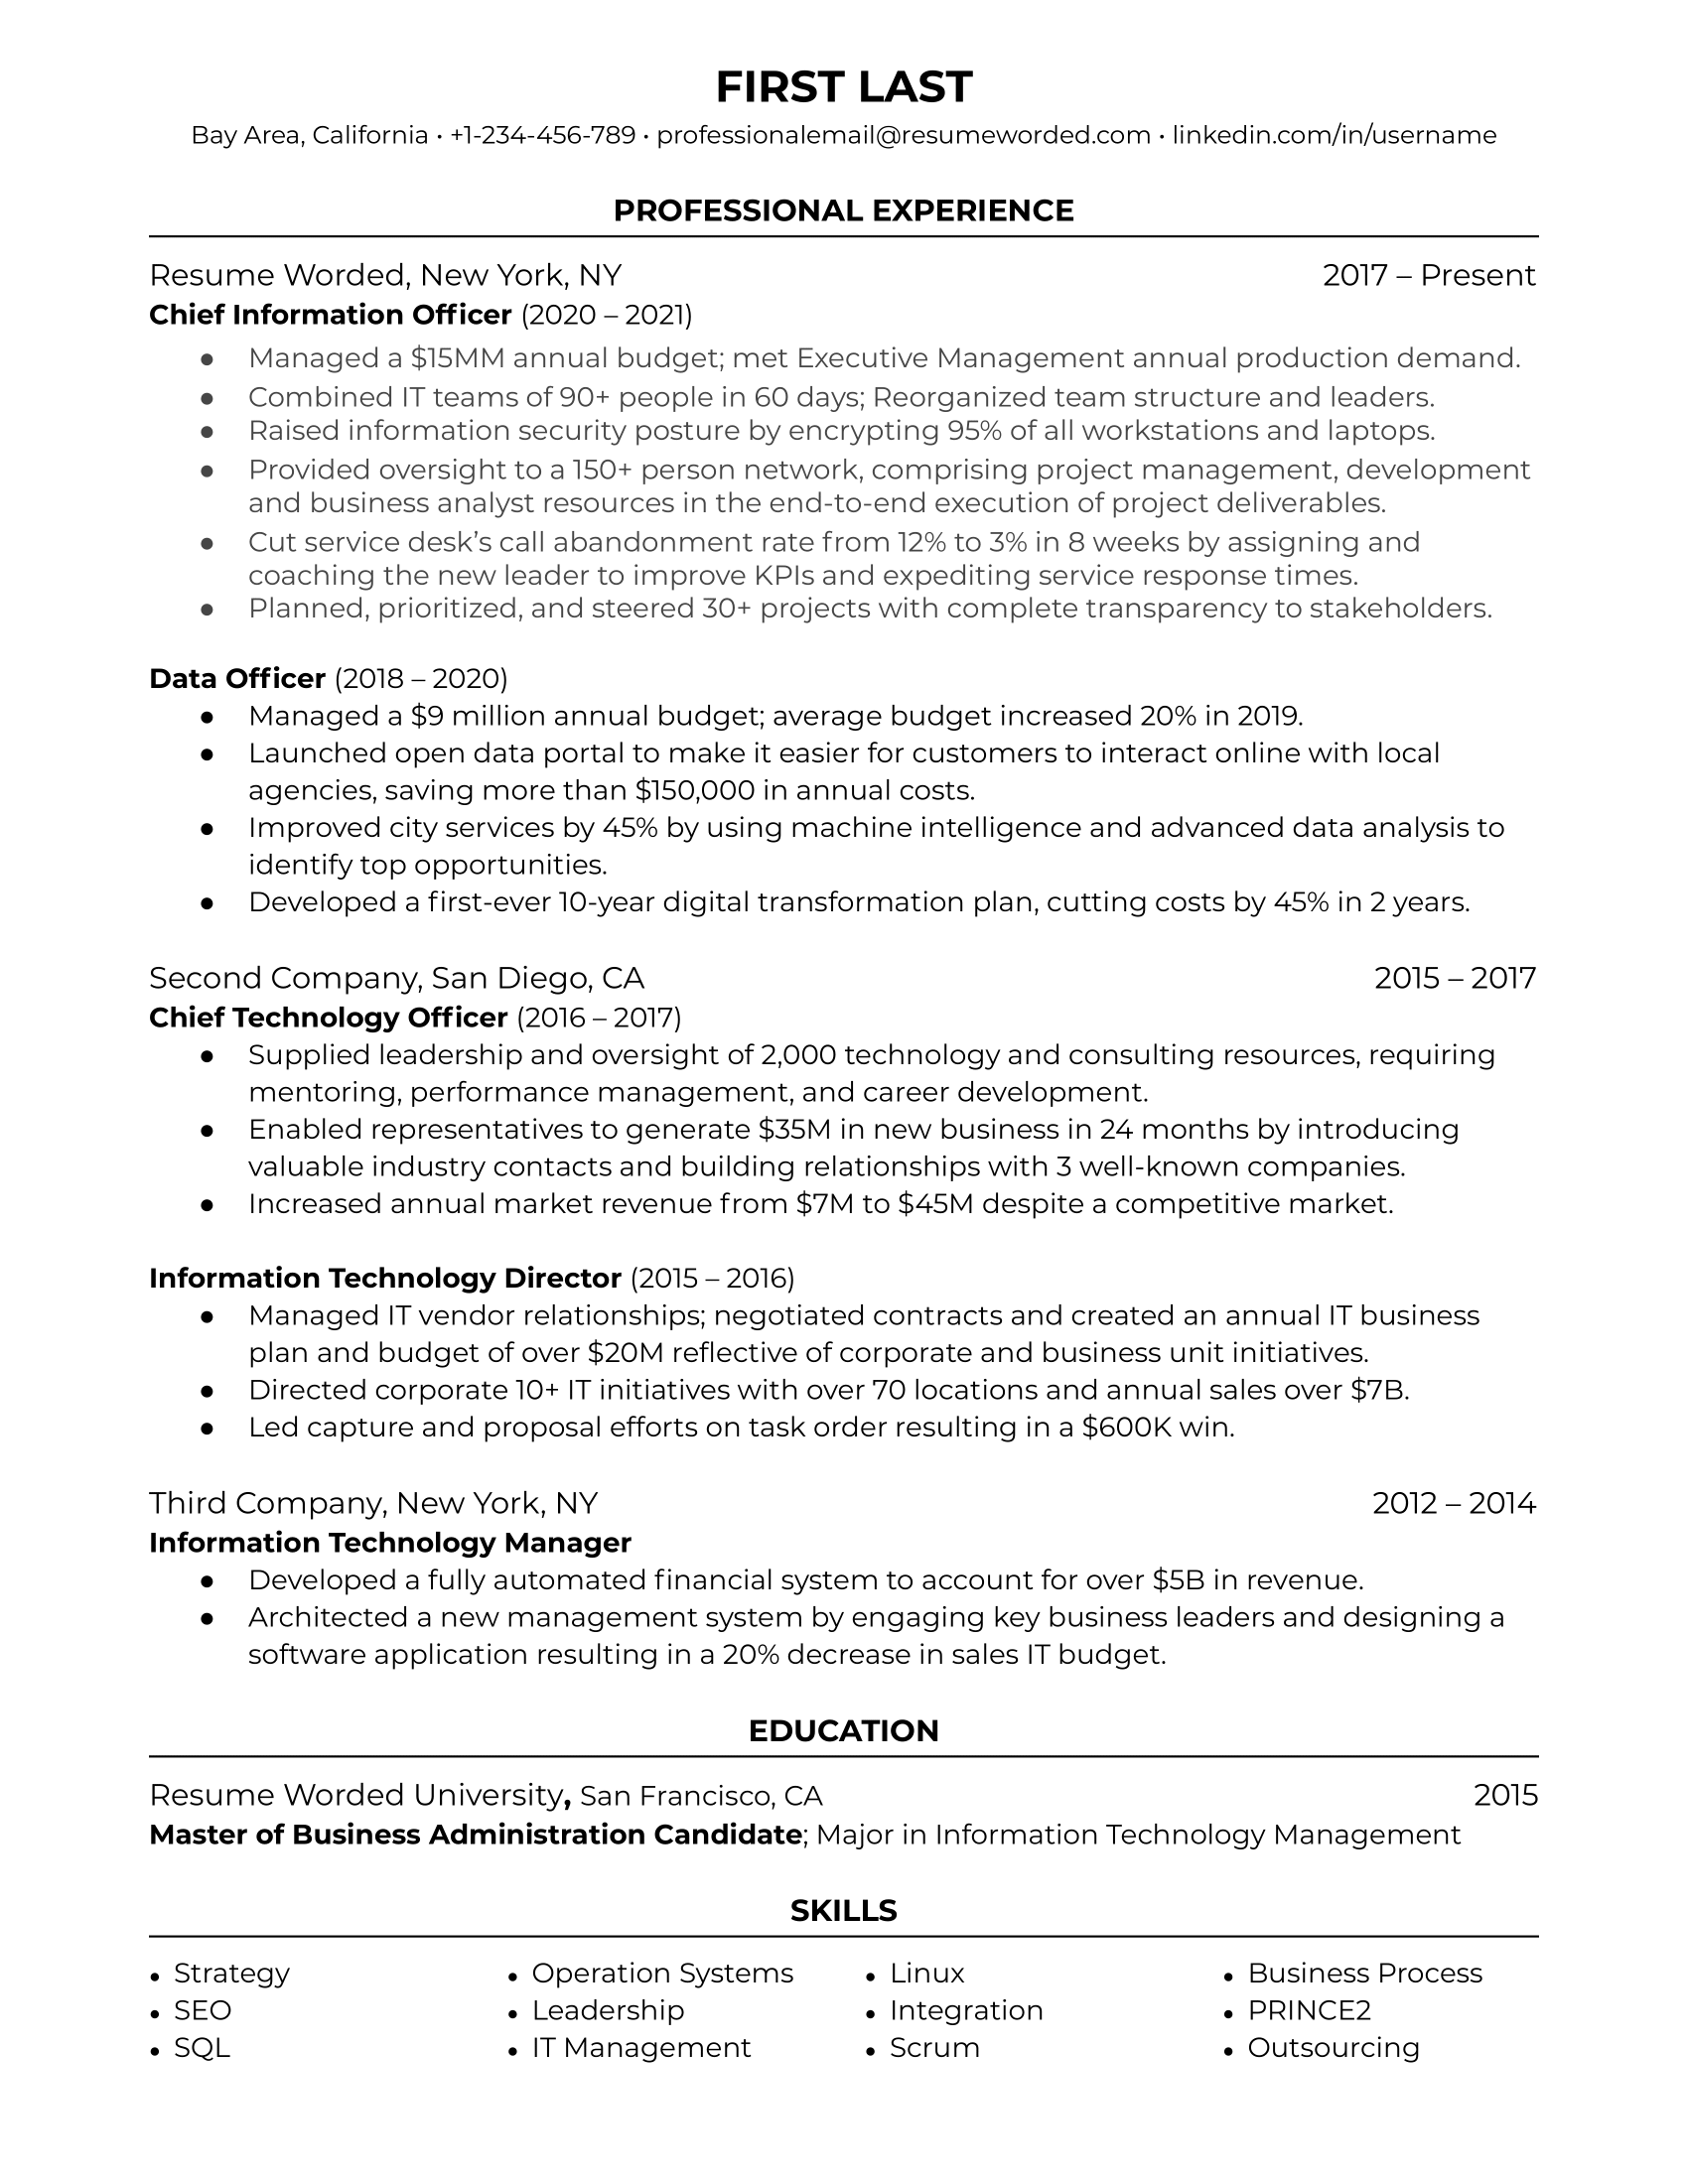 Chief Information Officer resume template example using metrics to illustrate recent achievements